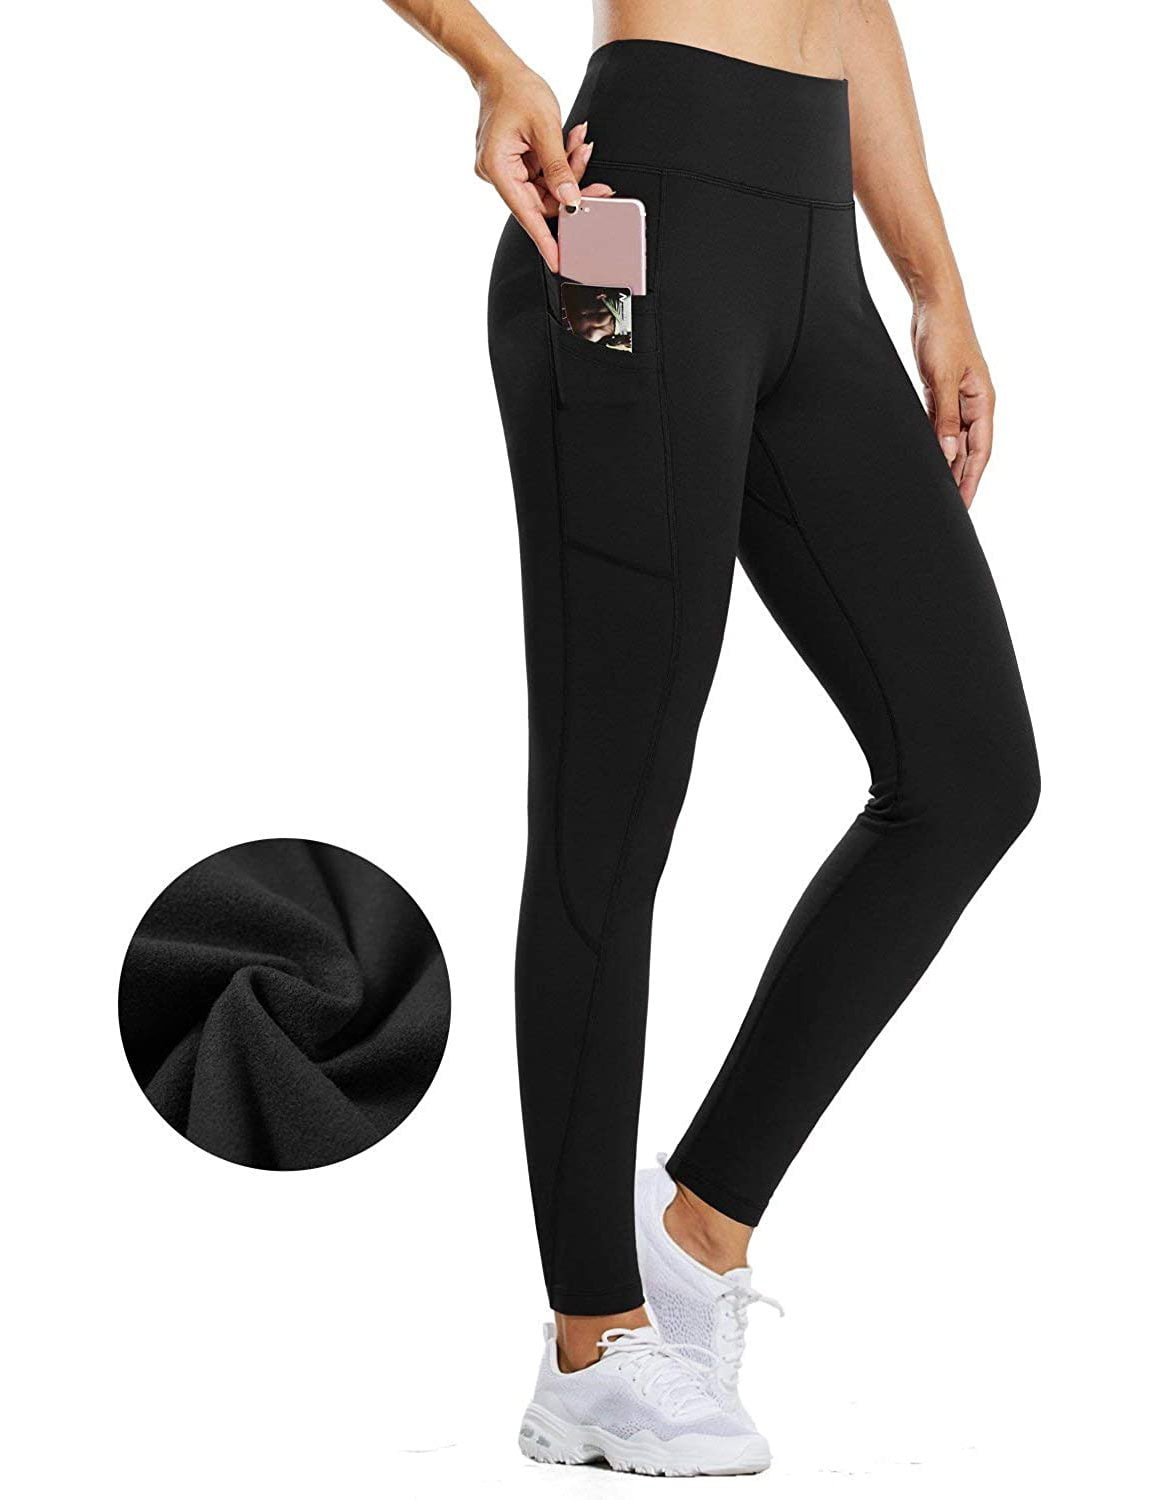 BALEAF Women's Fleece Lined Winter Leggings High Waisted Thermal Warm Yoga Pants with Pockets 